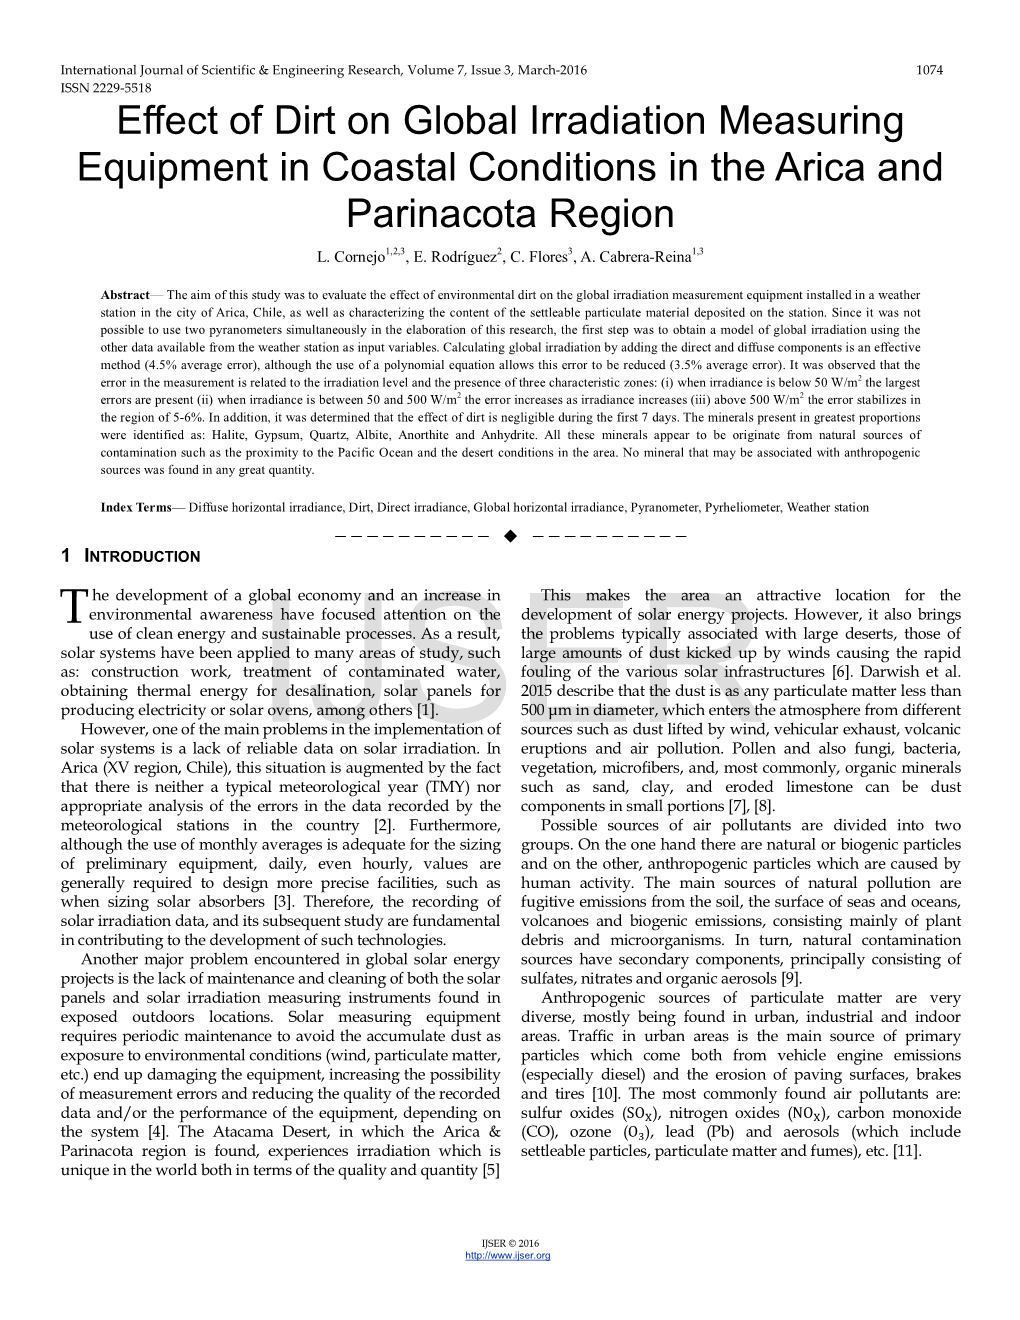 Effect of Dirt on Global Irradiation Measuring Equipment in Coastal Conditions in the Arica and Parinacota Region L